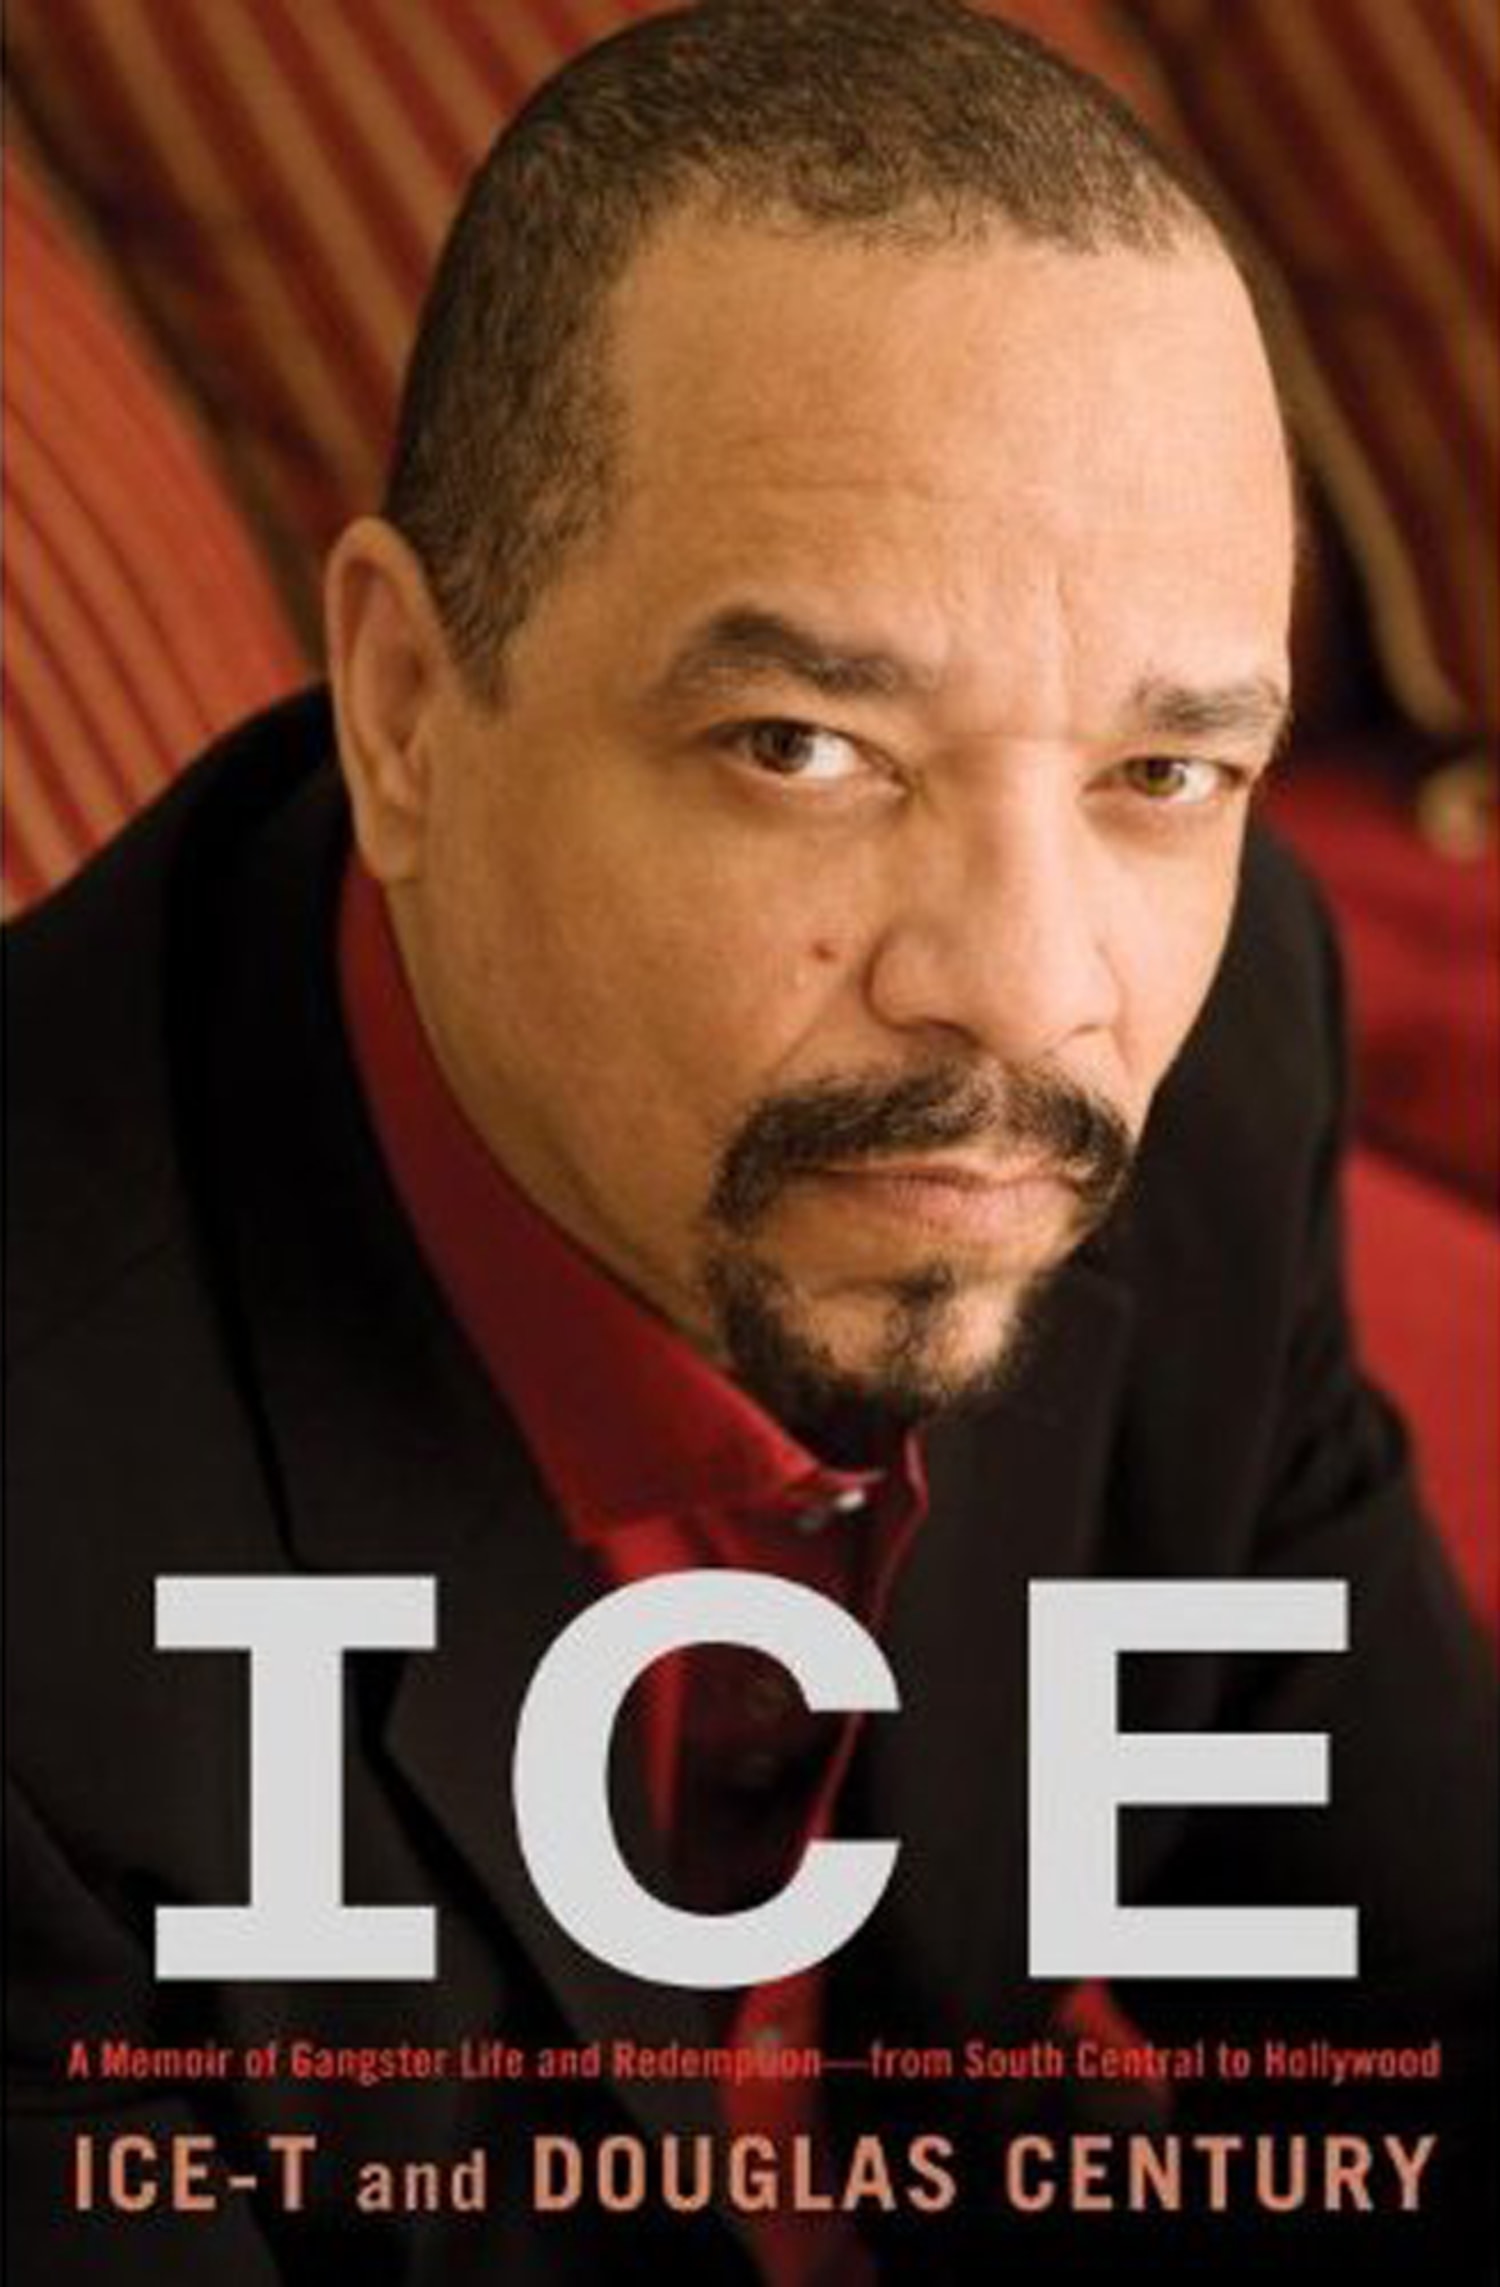 Ice-T didnt have an ounce of self